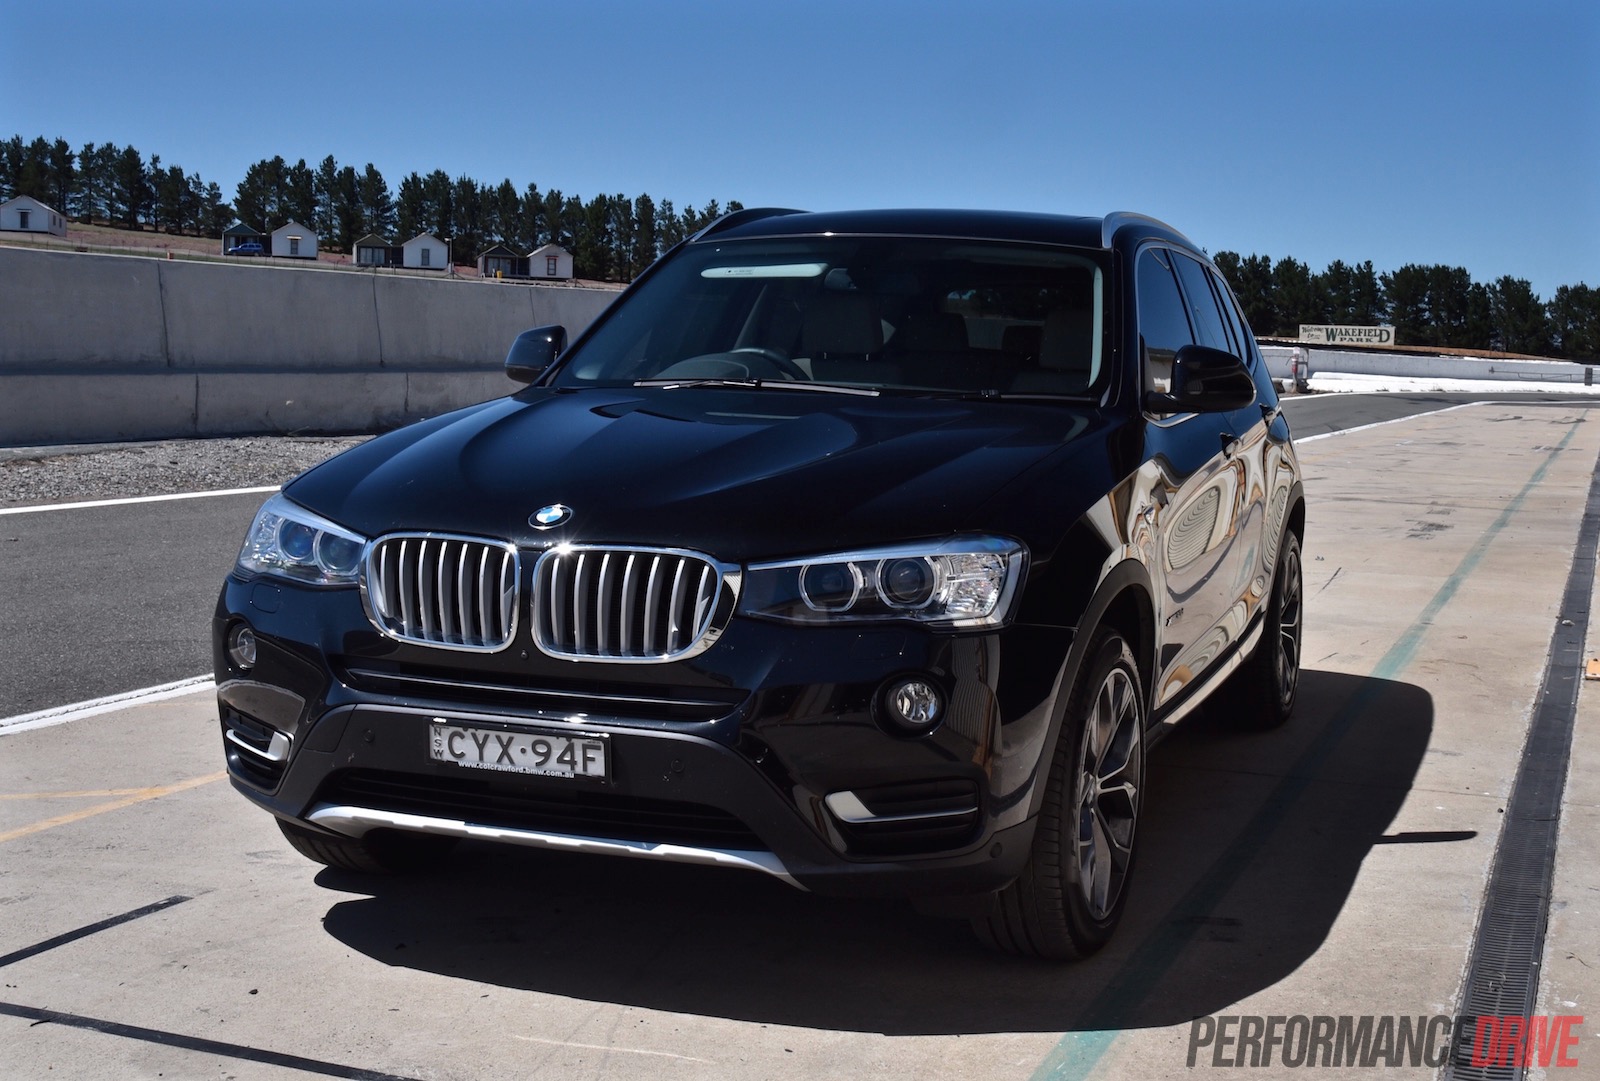 BMW X3 track test: Can an SUV handle like a sports car? (video)